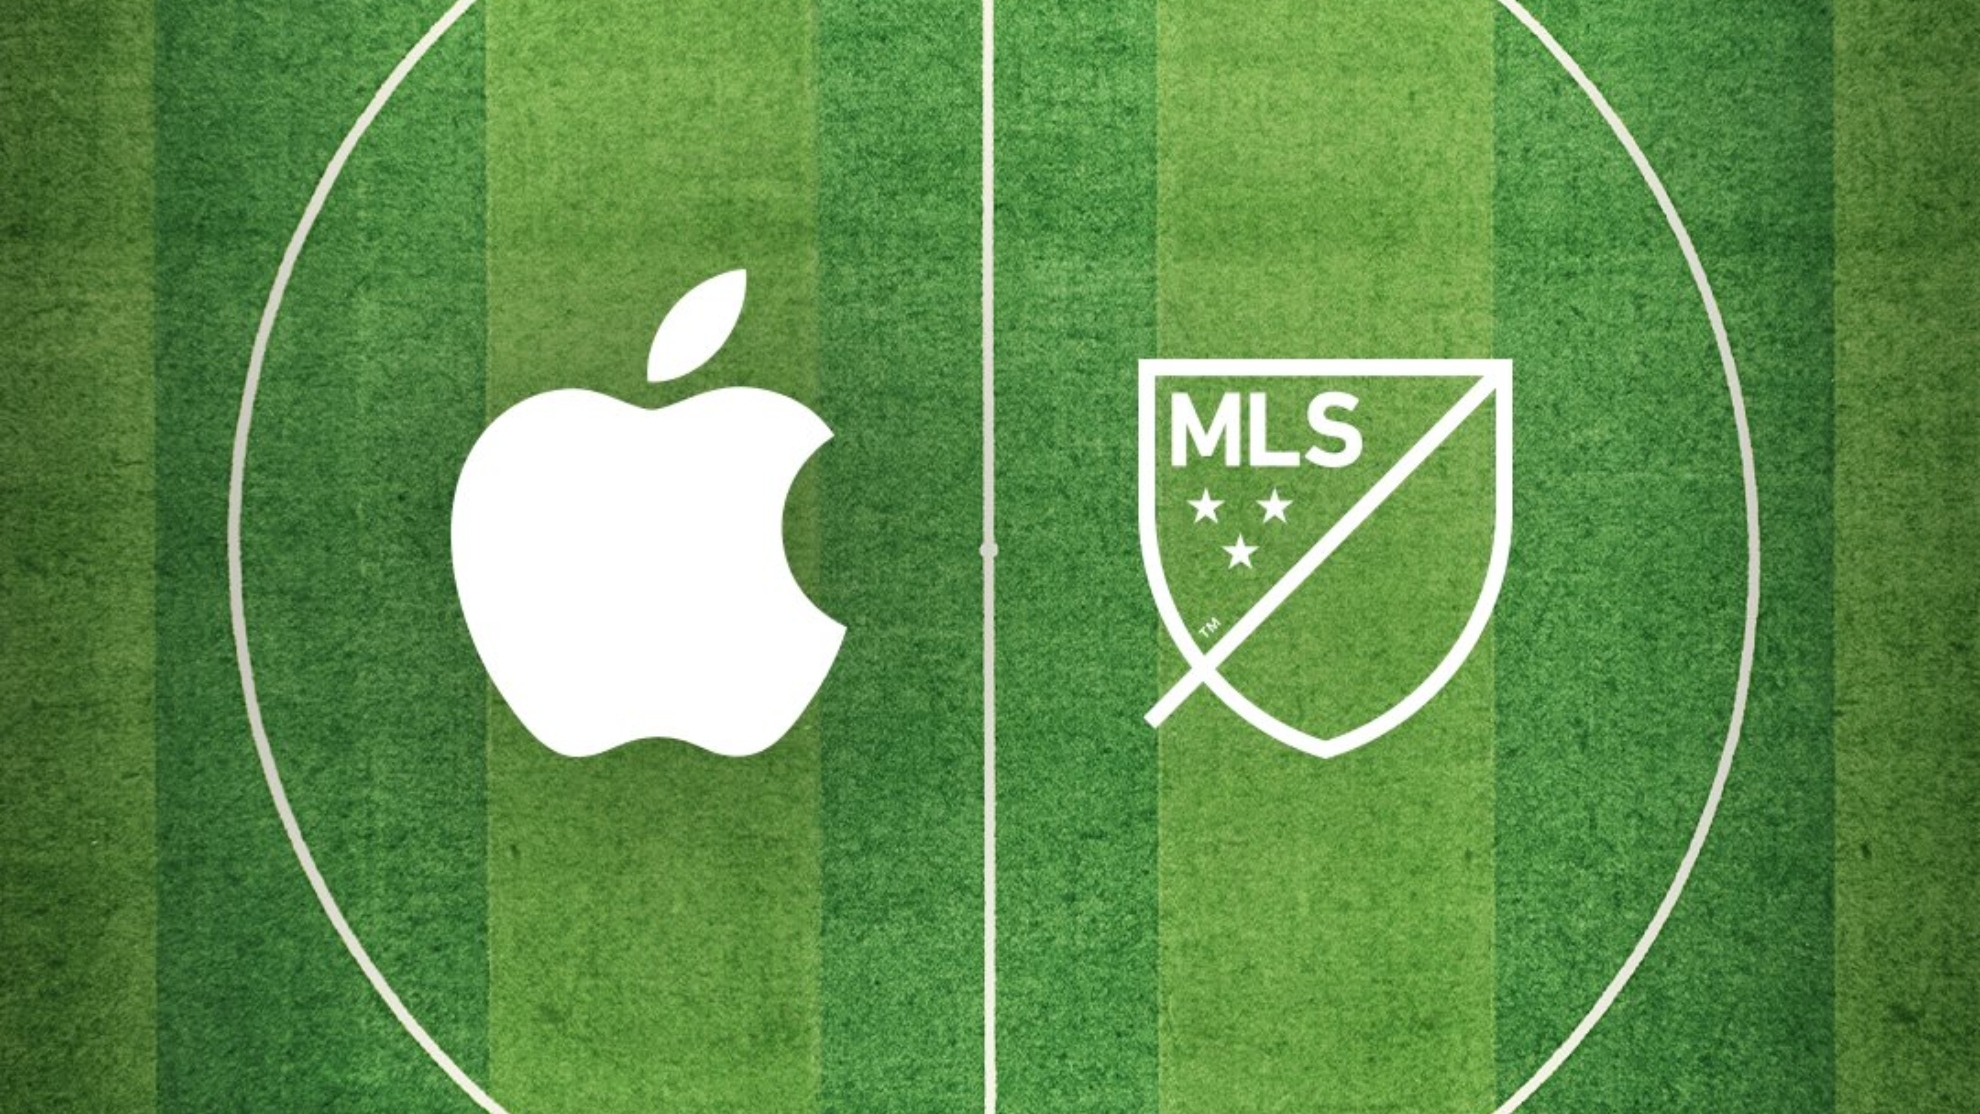 Apple and the MLS have come to a 10-year broadcast agreement